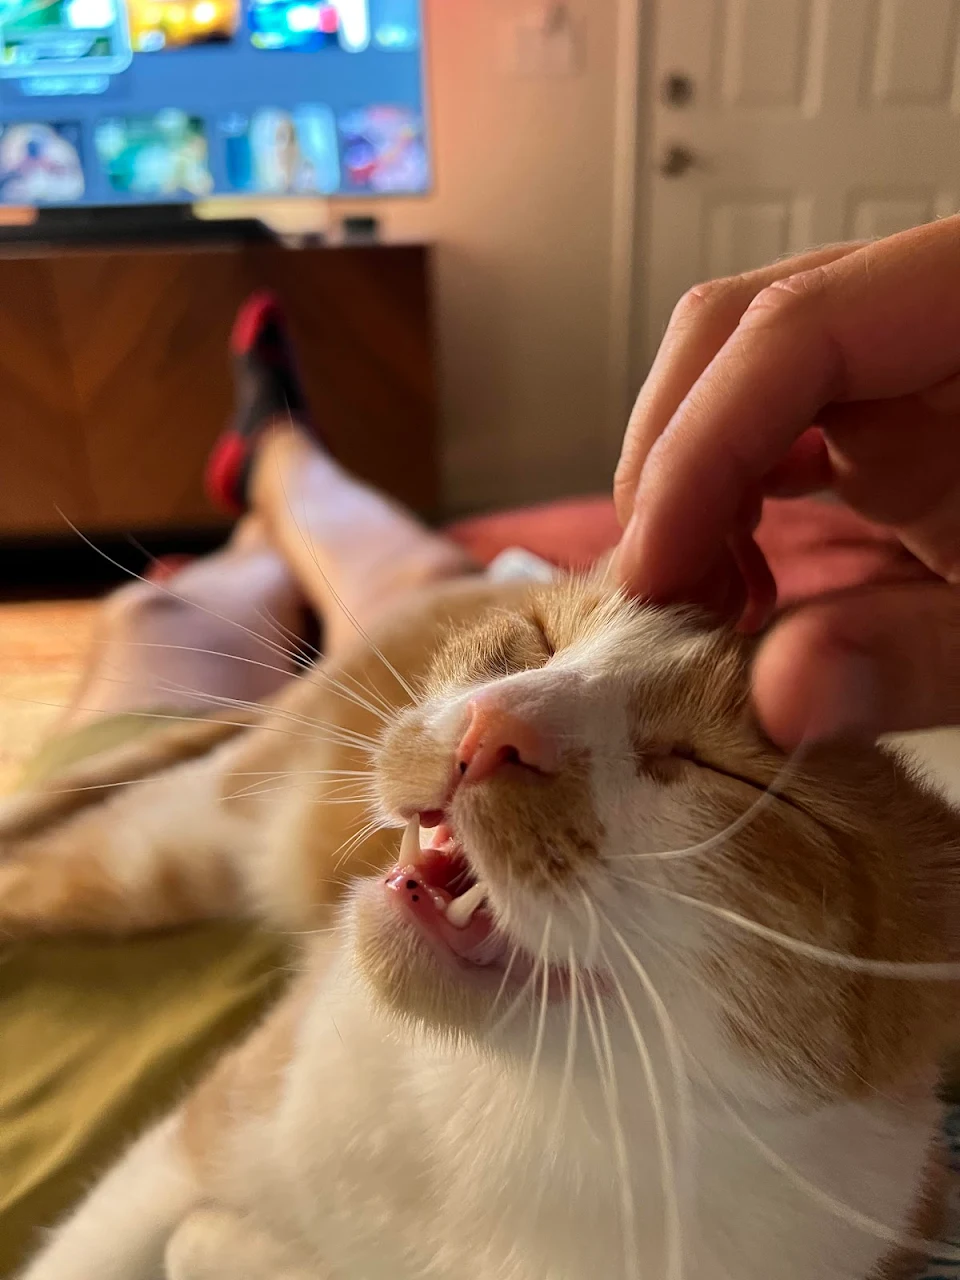 He loves the head scratchys!